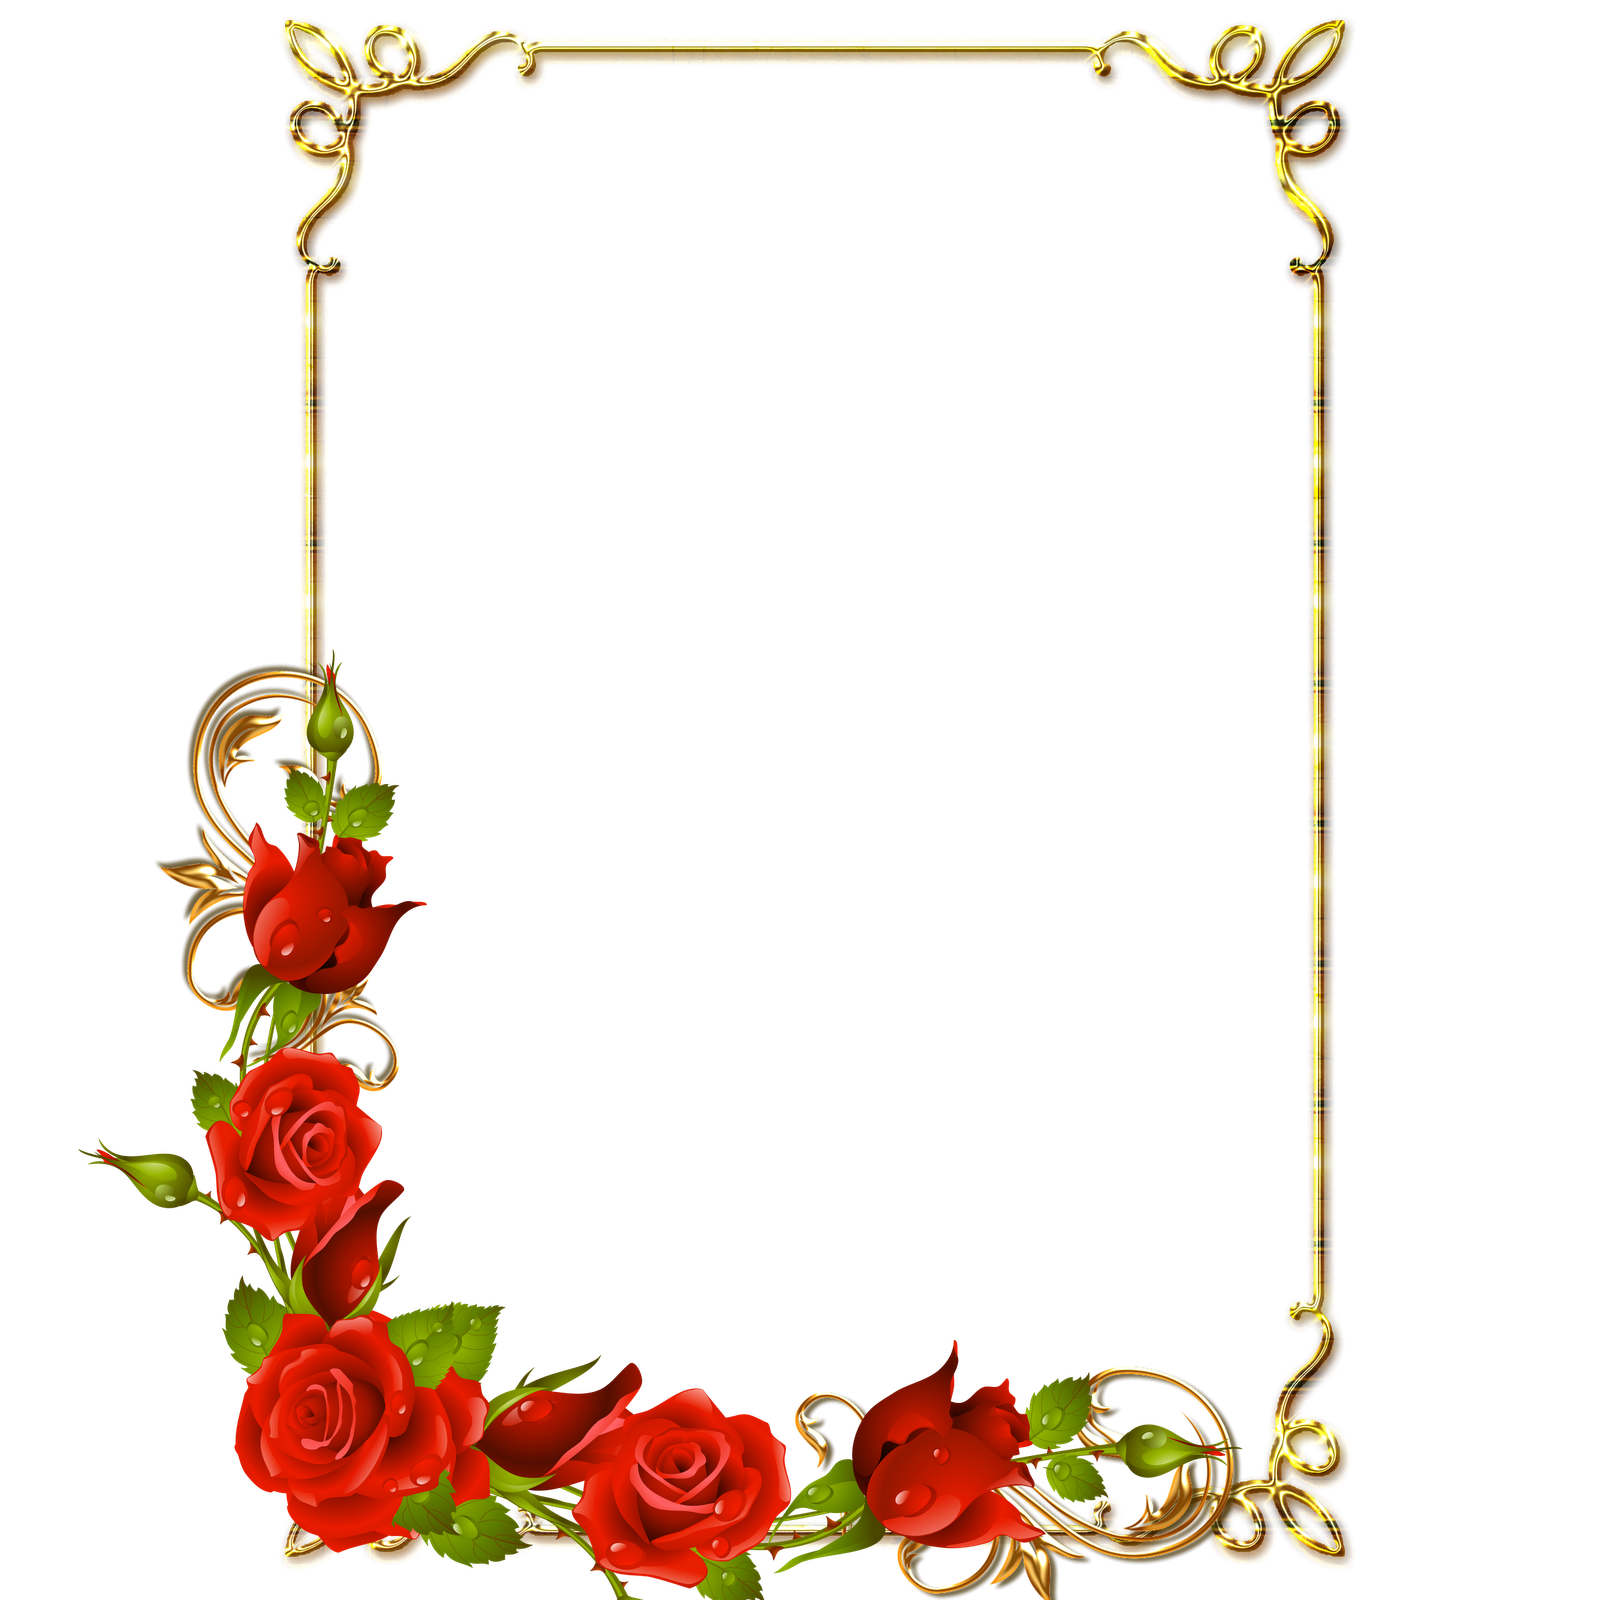 Rose photo frame png #24574 - Free Icons and PNG Backgrounds